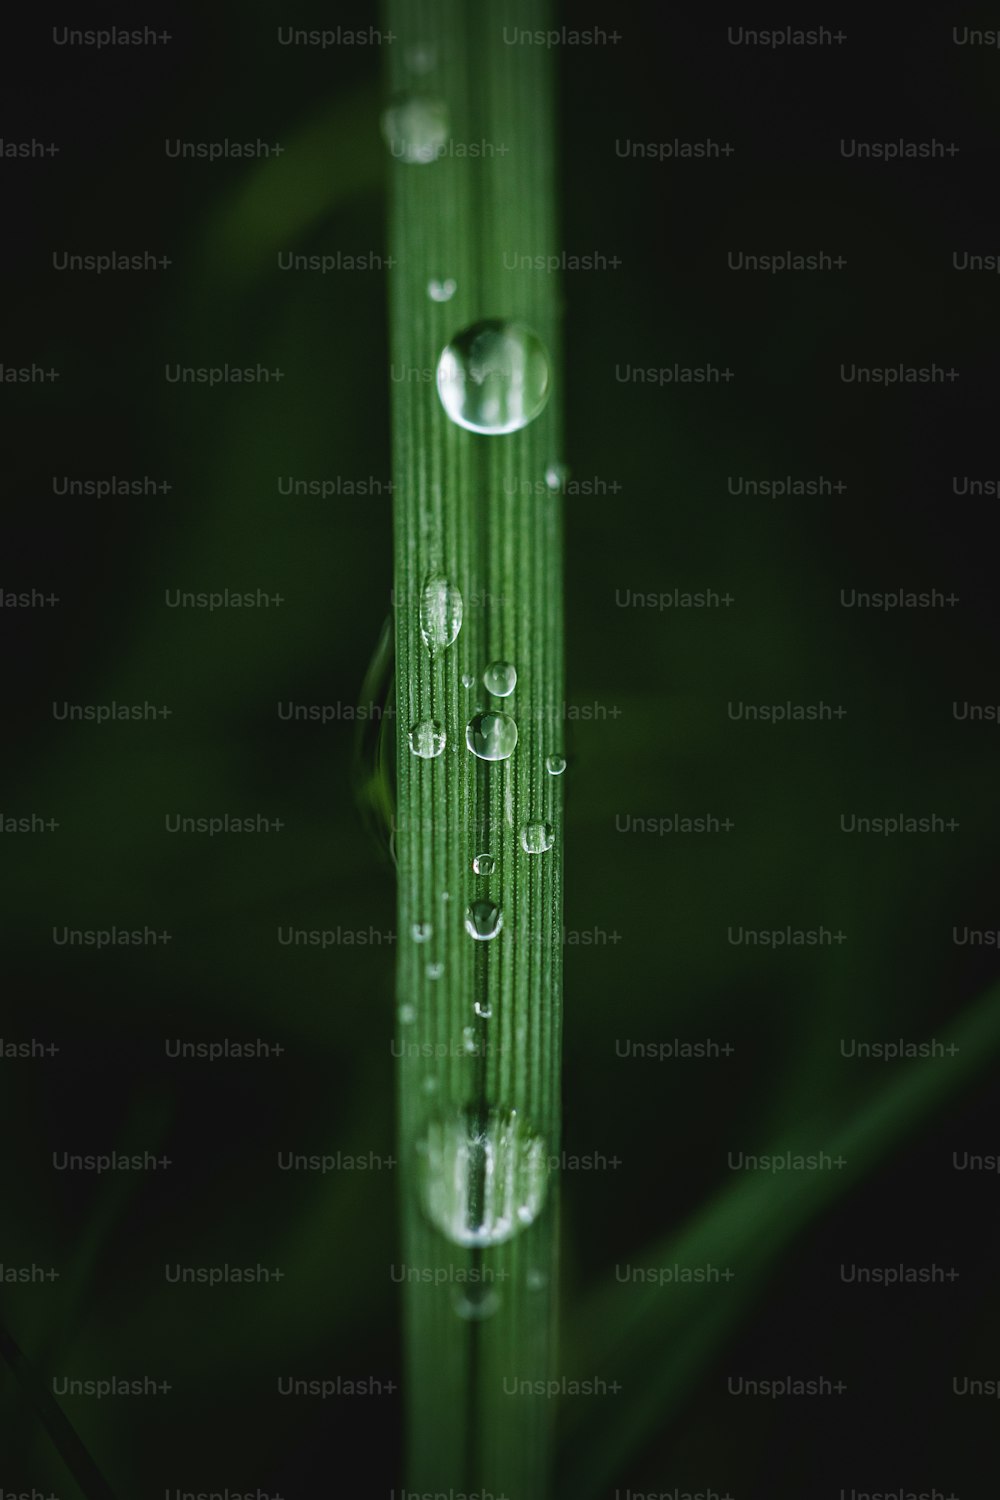 a close up of water droplets on a blade of grass